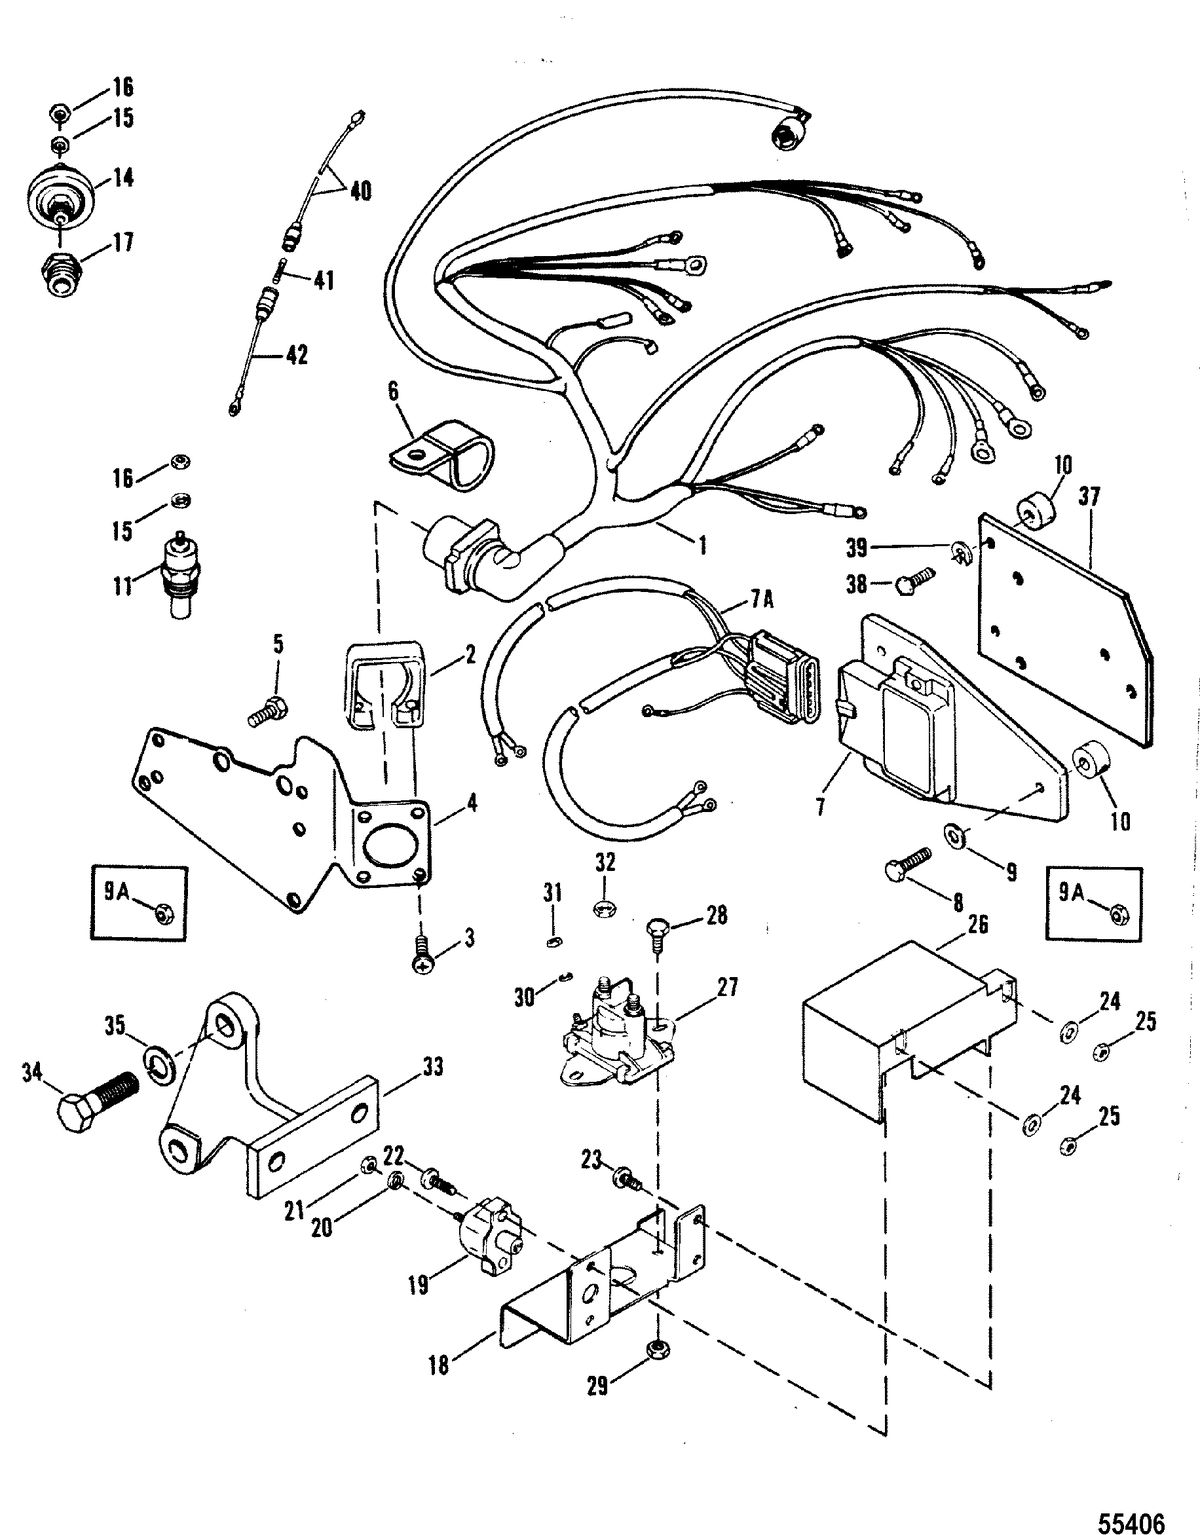 MERCRUISER 454 MAGNUM BRAVO ENGINE WIRING HARNESS, ELECTRICAL AND IGNITION